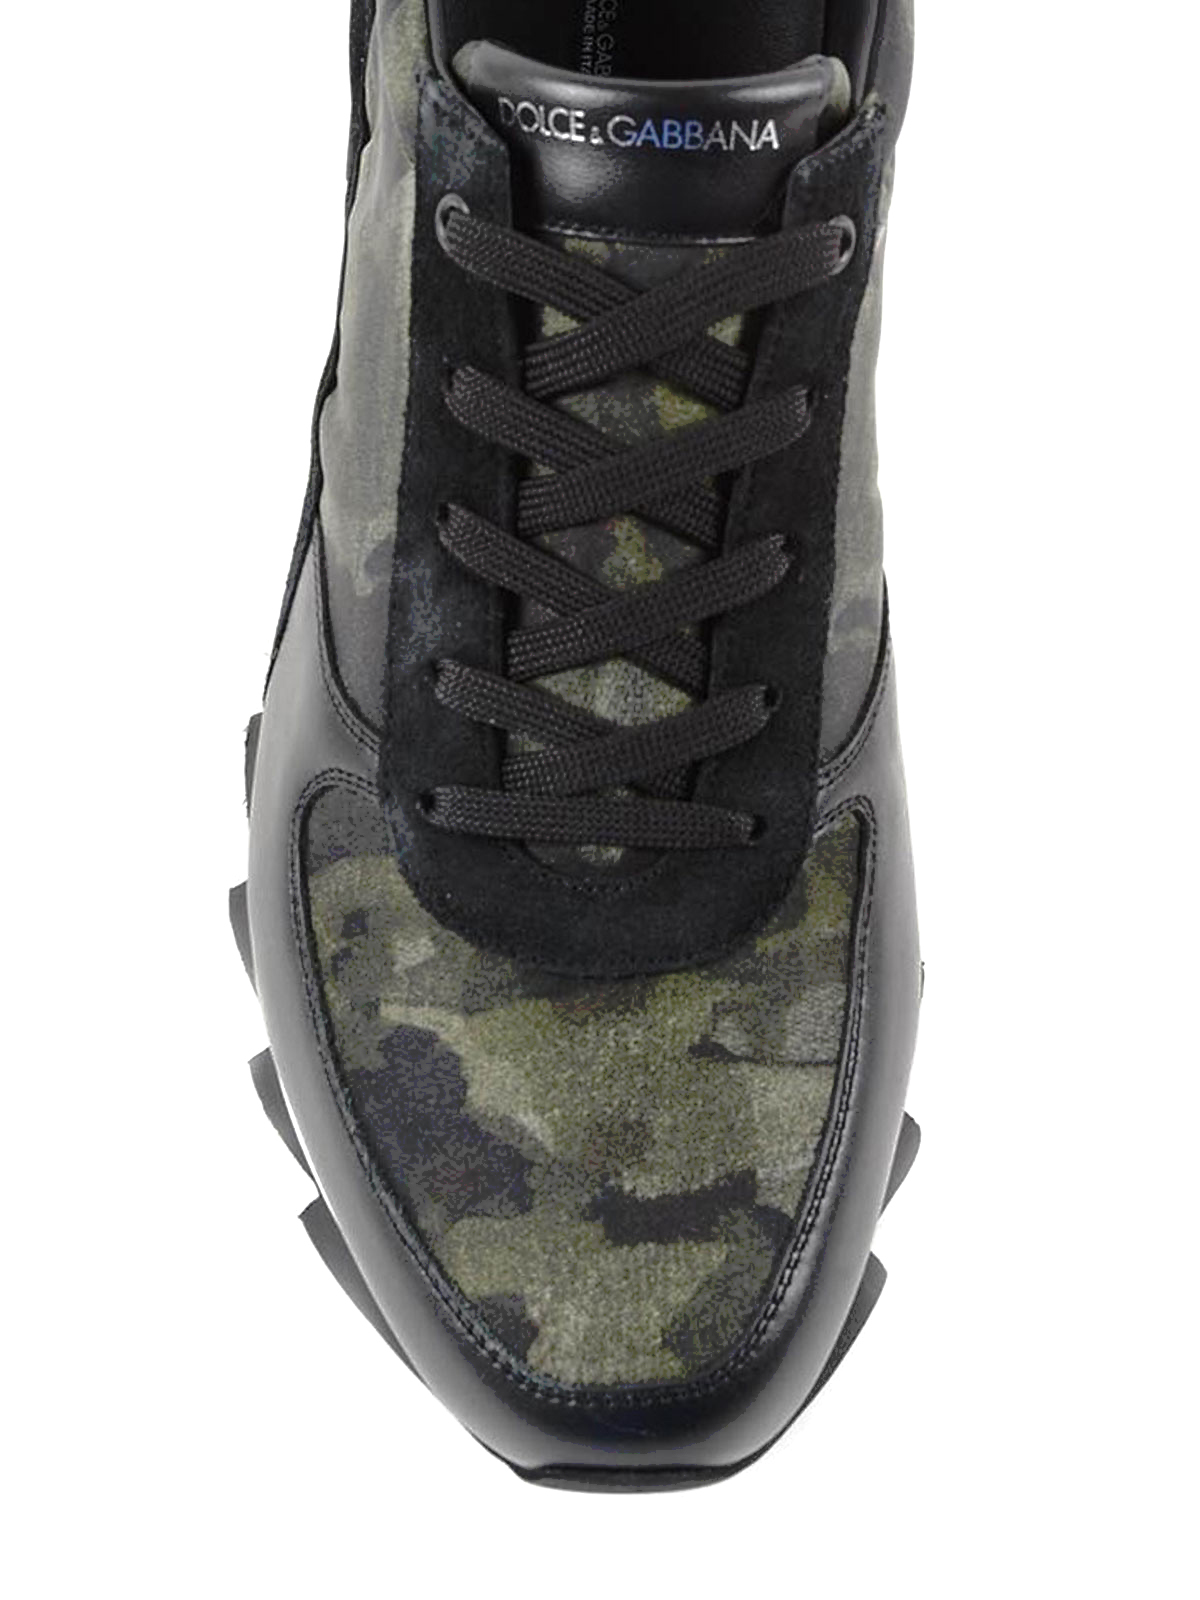 dolce gabbana camouflage sneakers